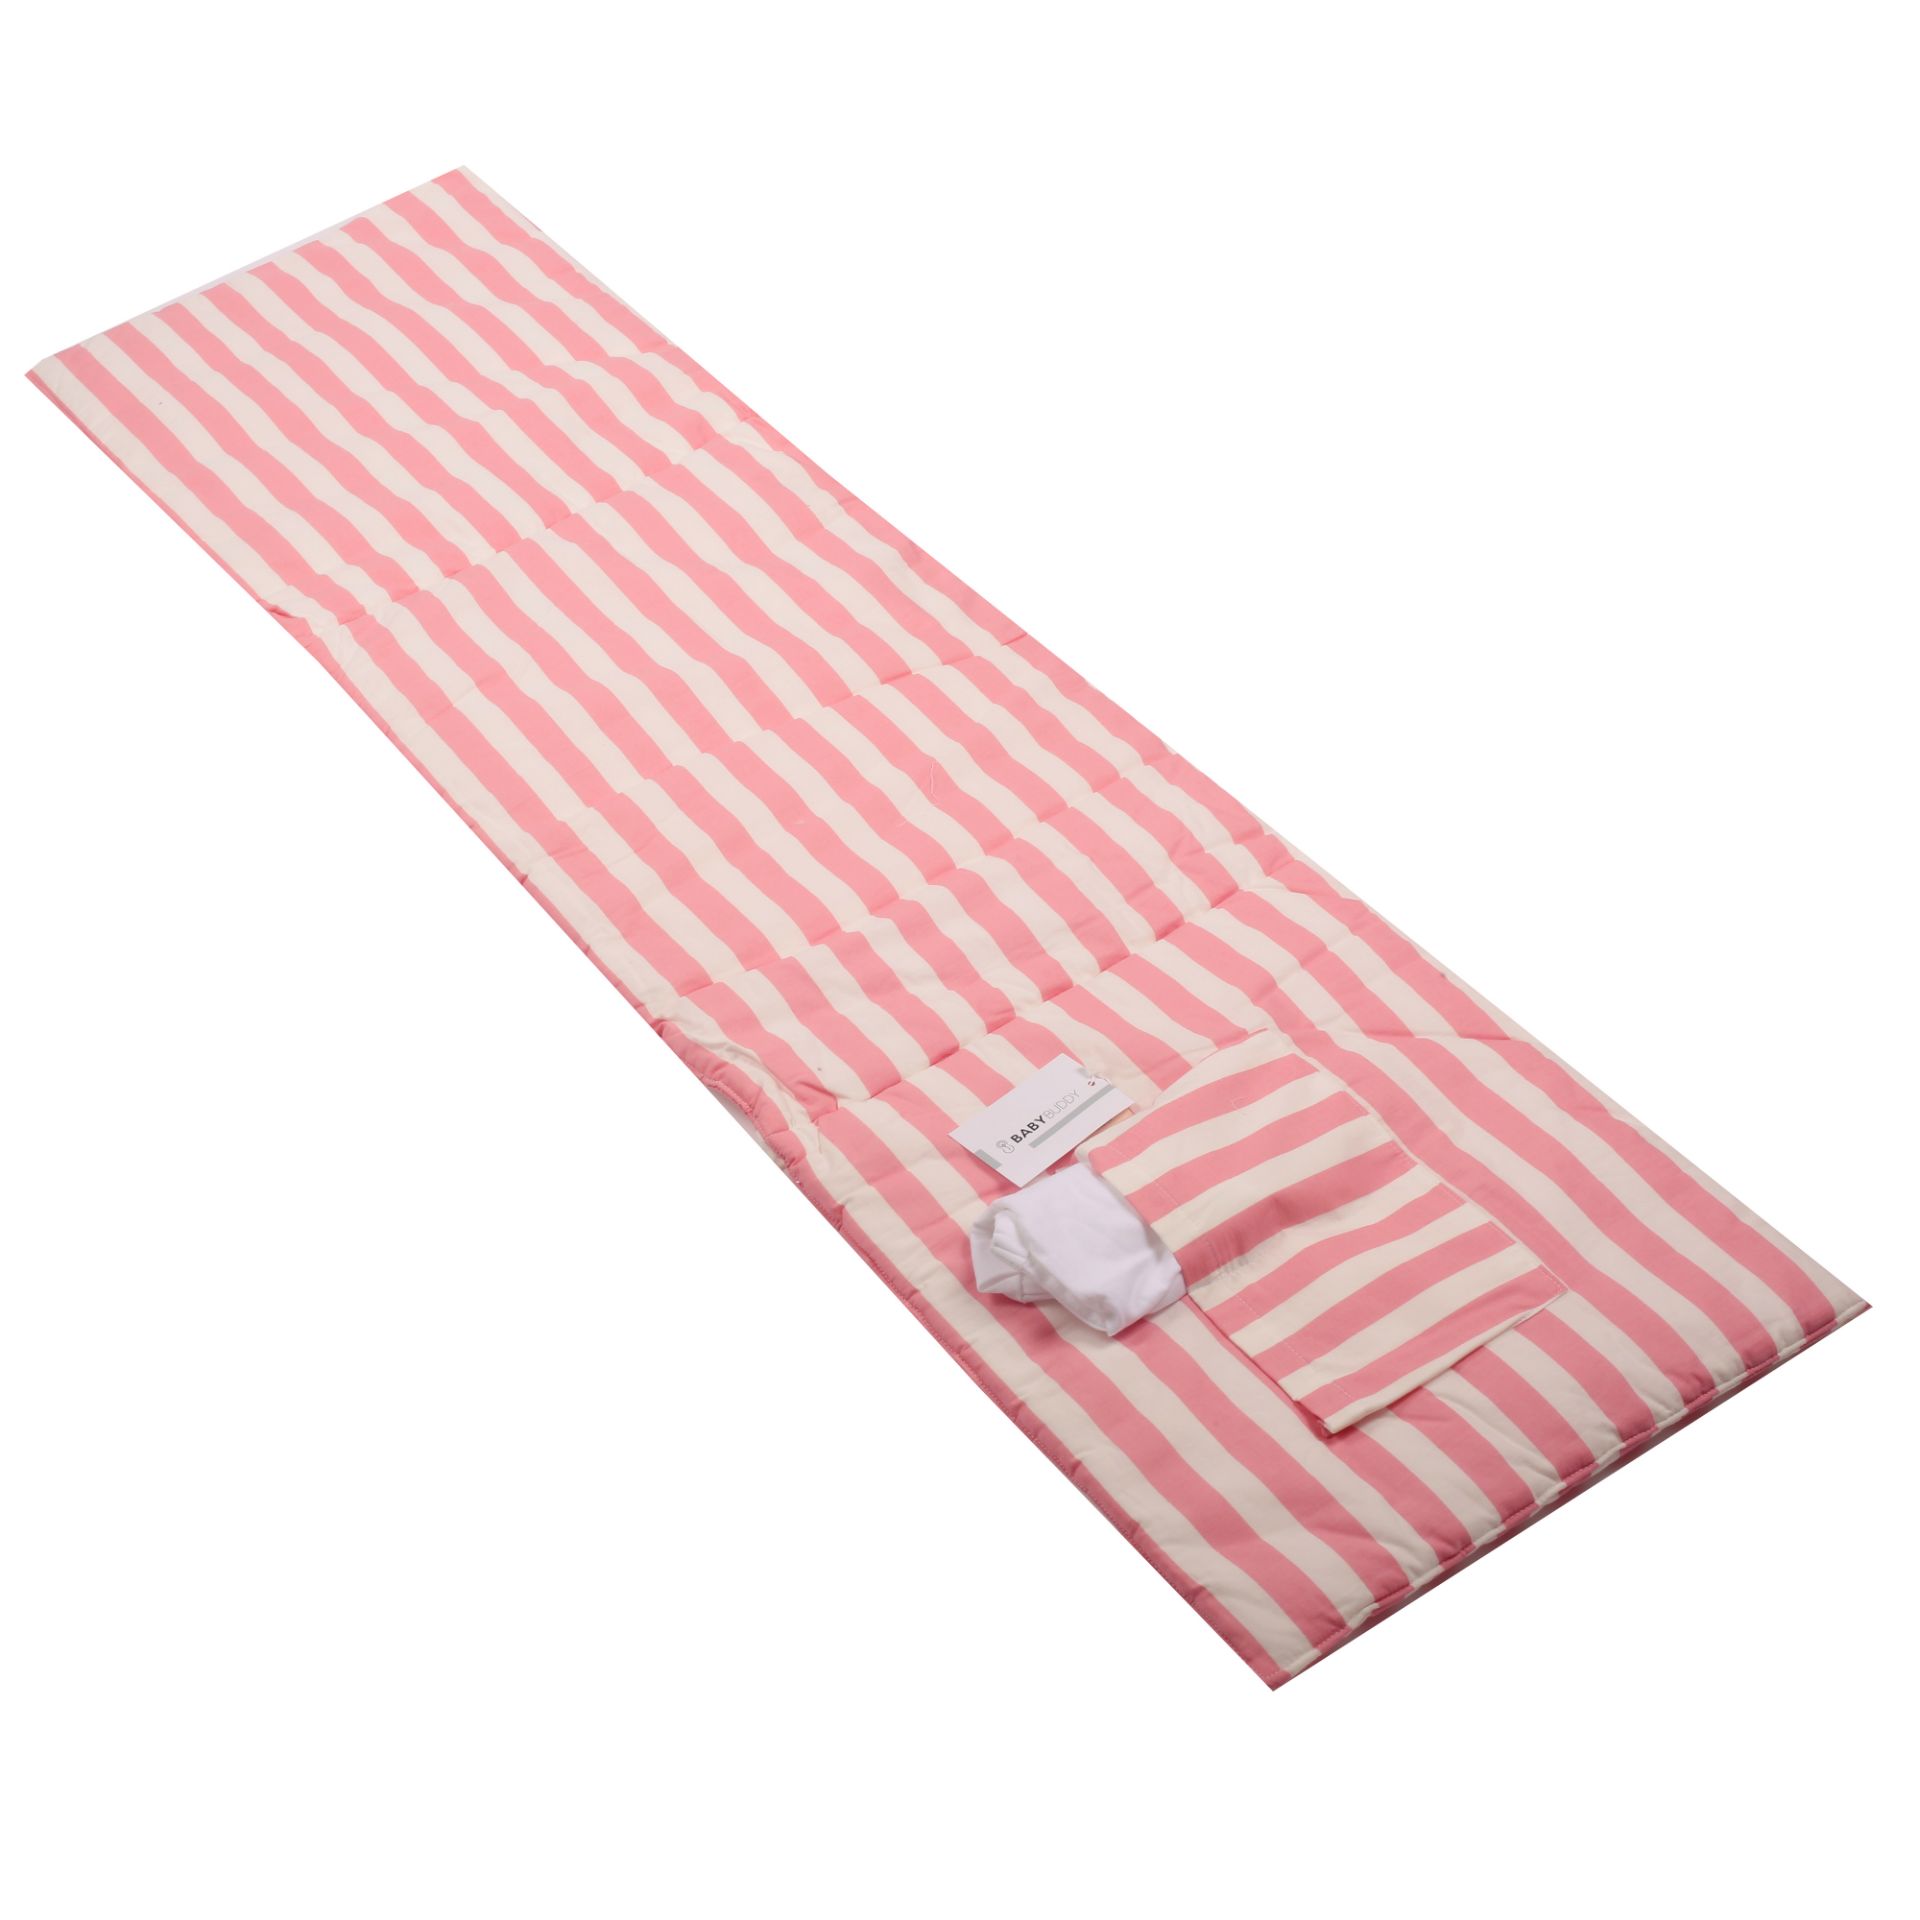 36 Baby Padded Cot Liners | Crib Rail Cover One-Piece Bumper Cot Bumper (RRP 29.99 Each) - Image 16 of 17